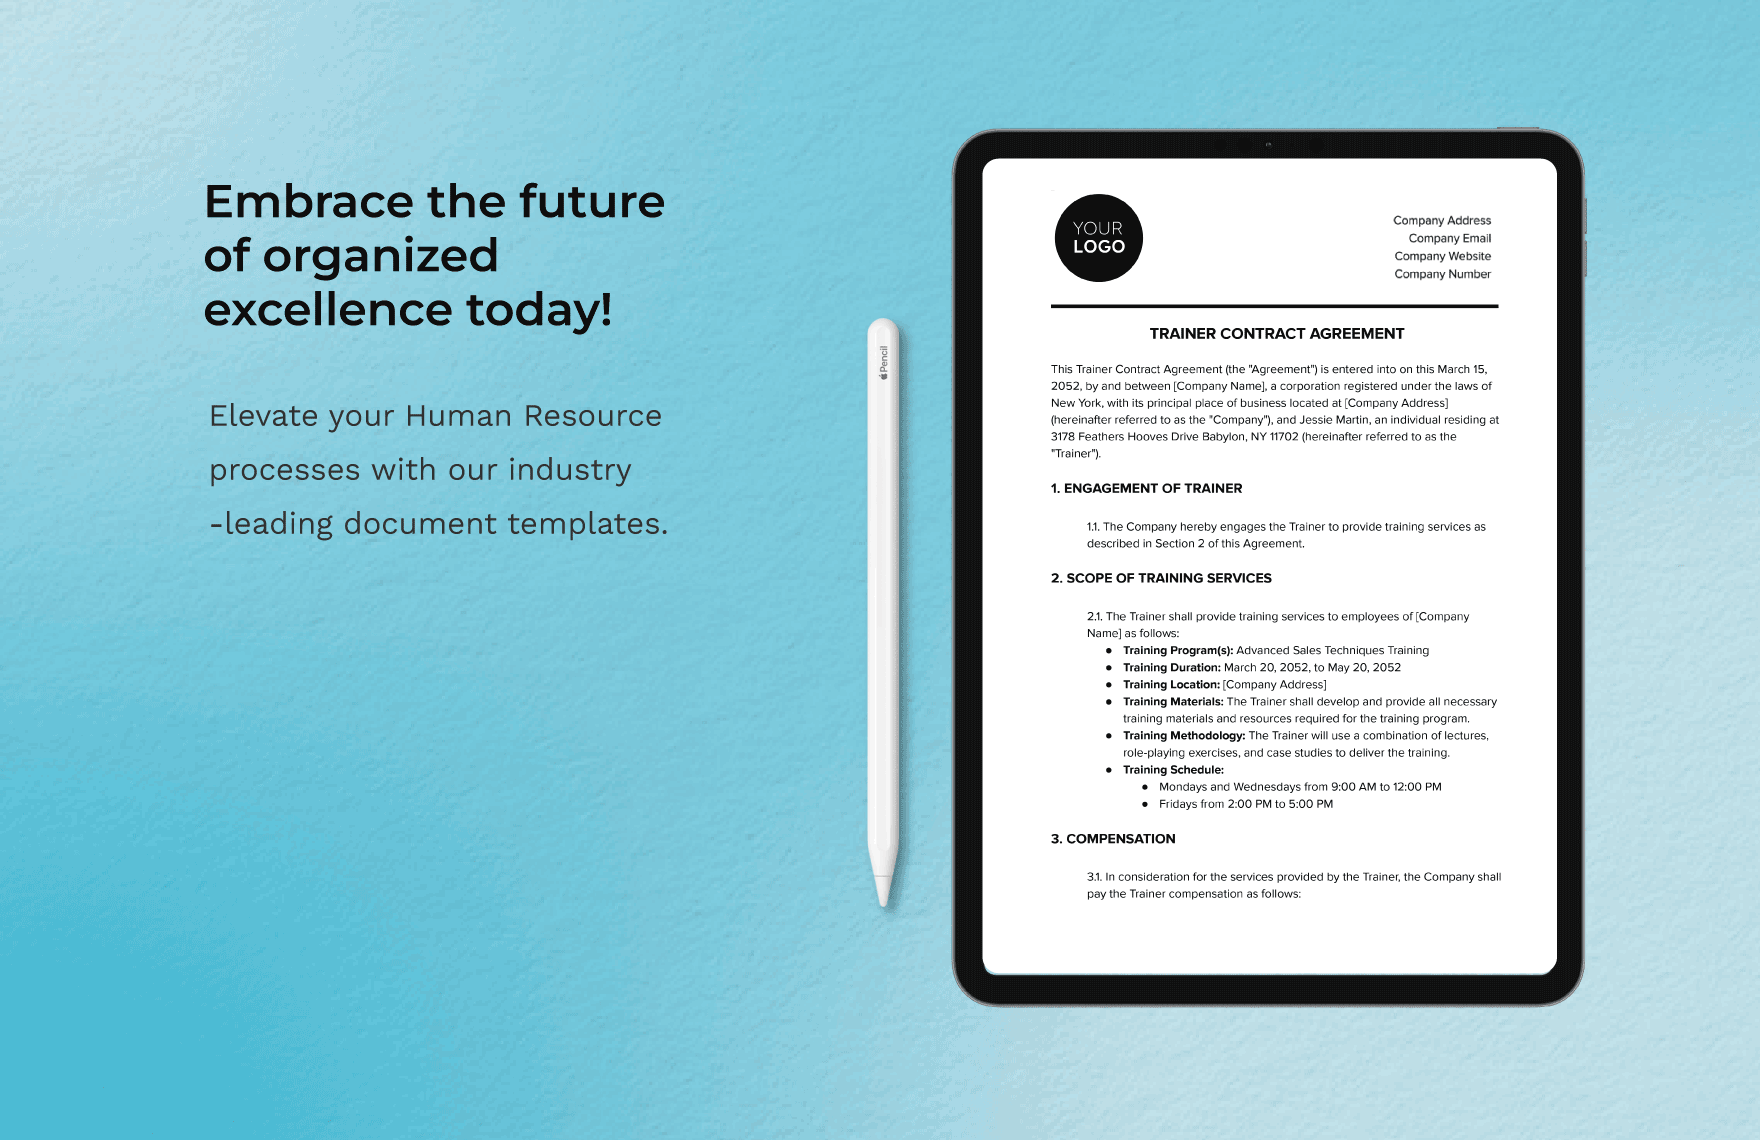 Trainer Contract Agreement HR Template